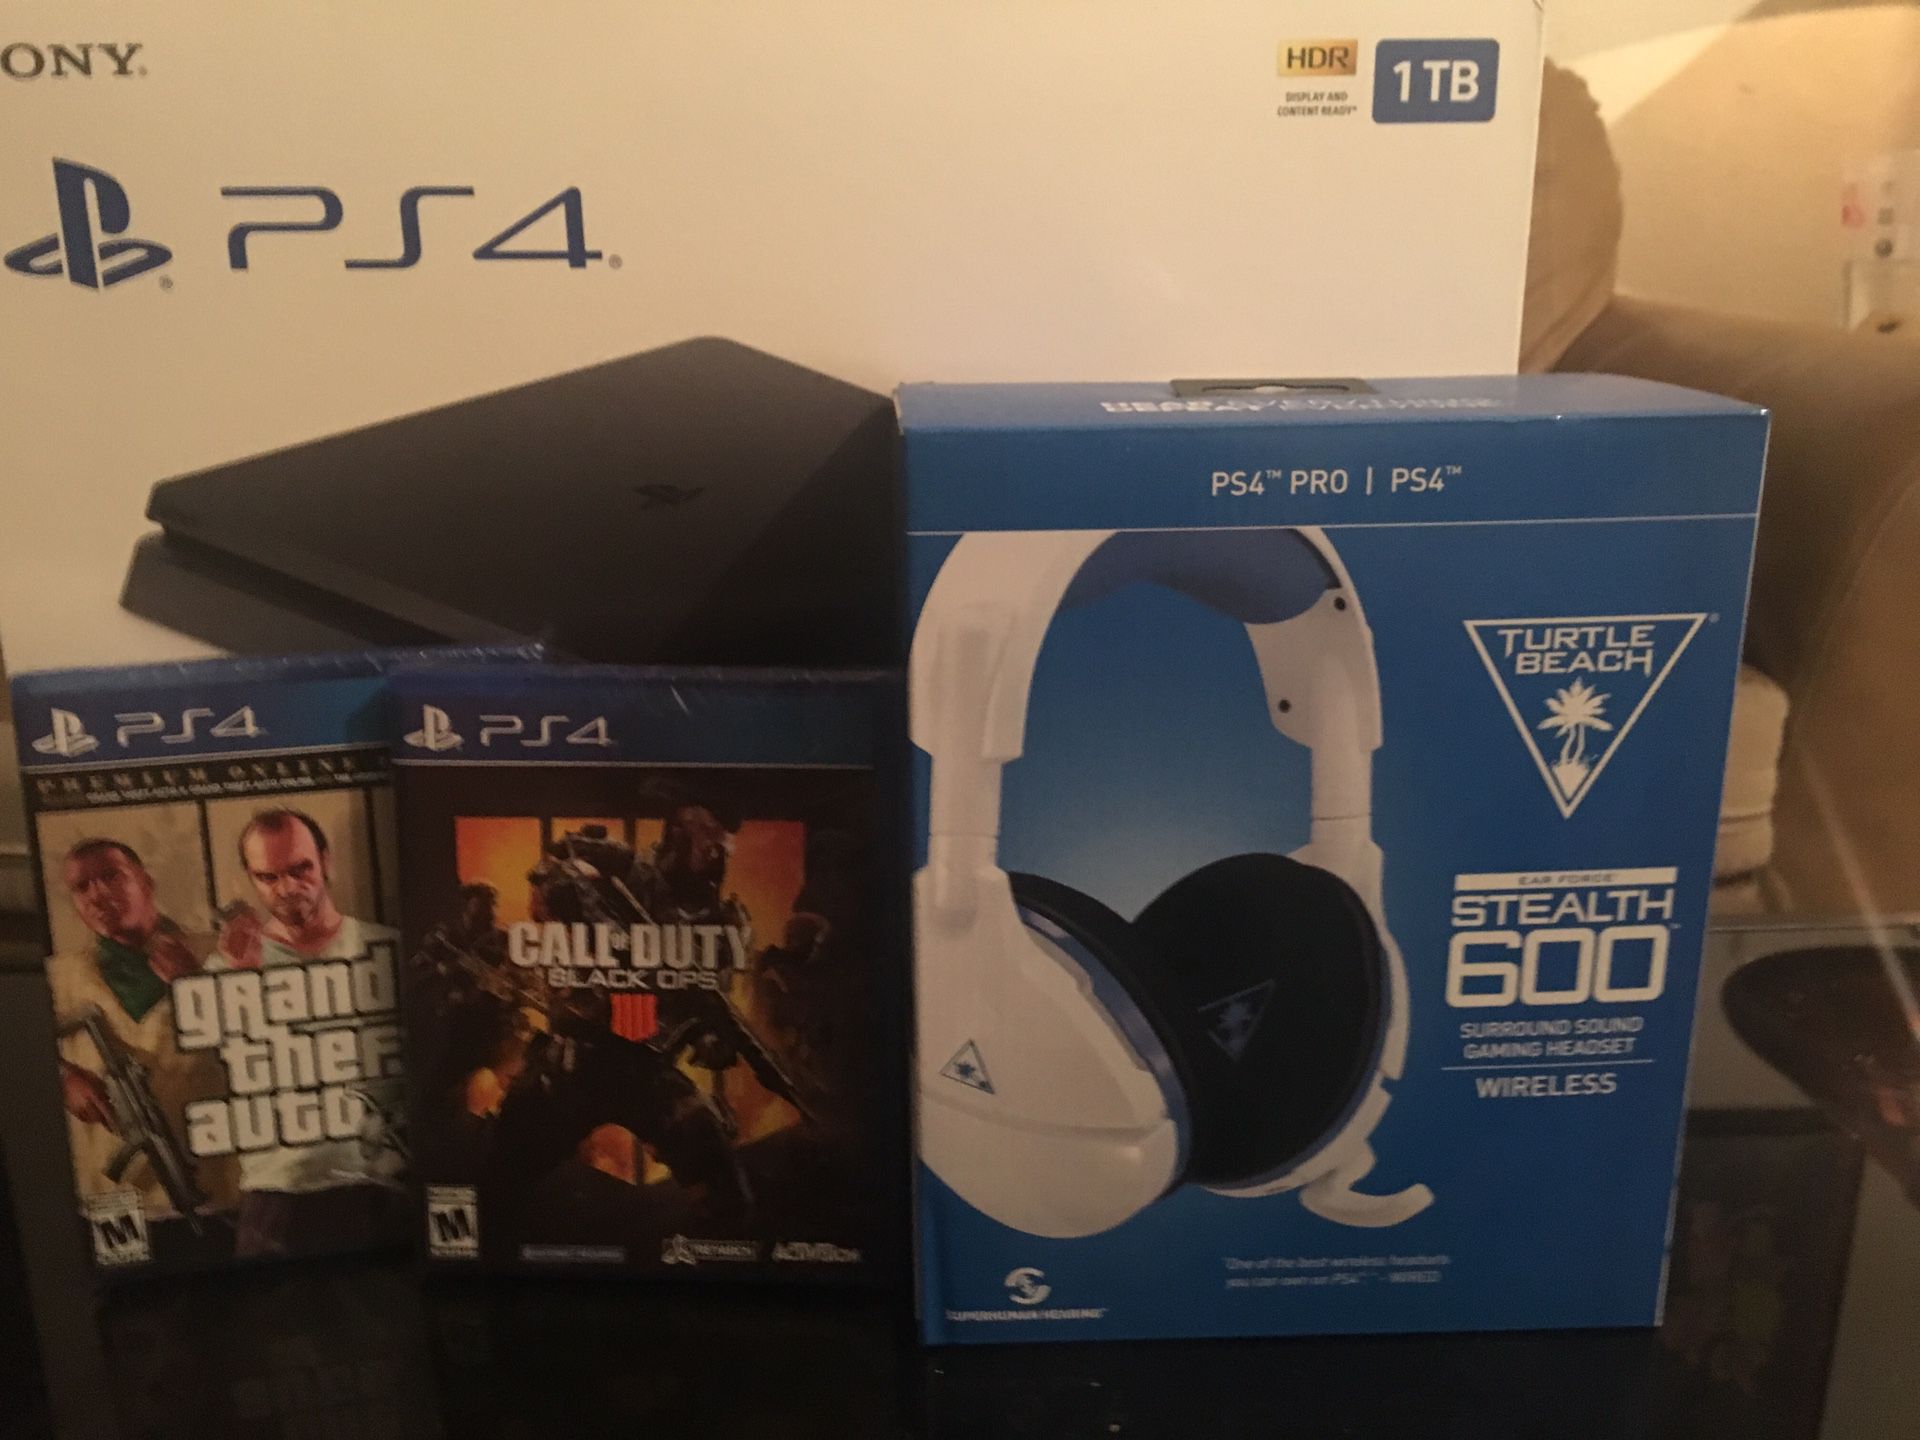 brand new never opened PS4 bundle